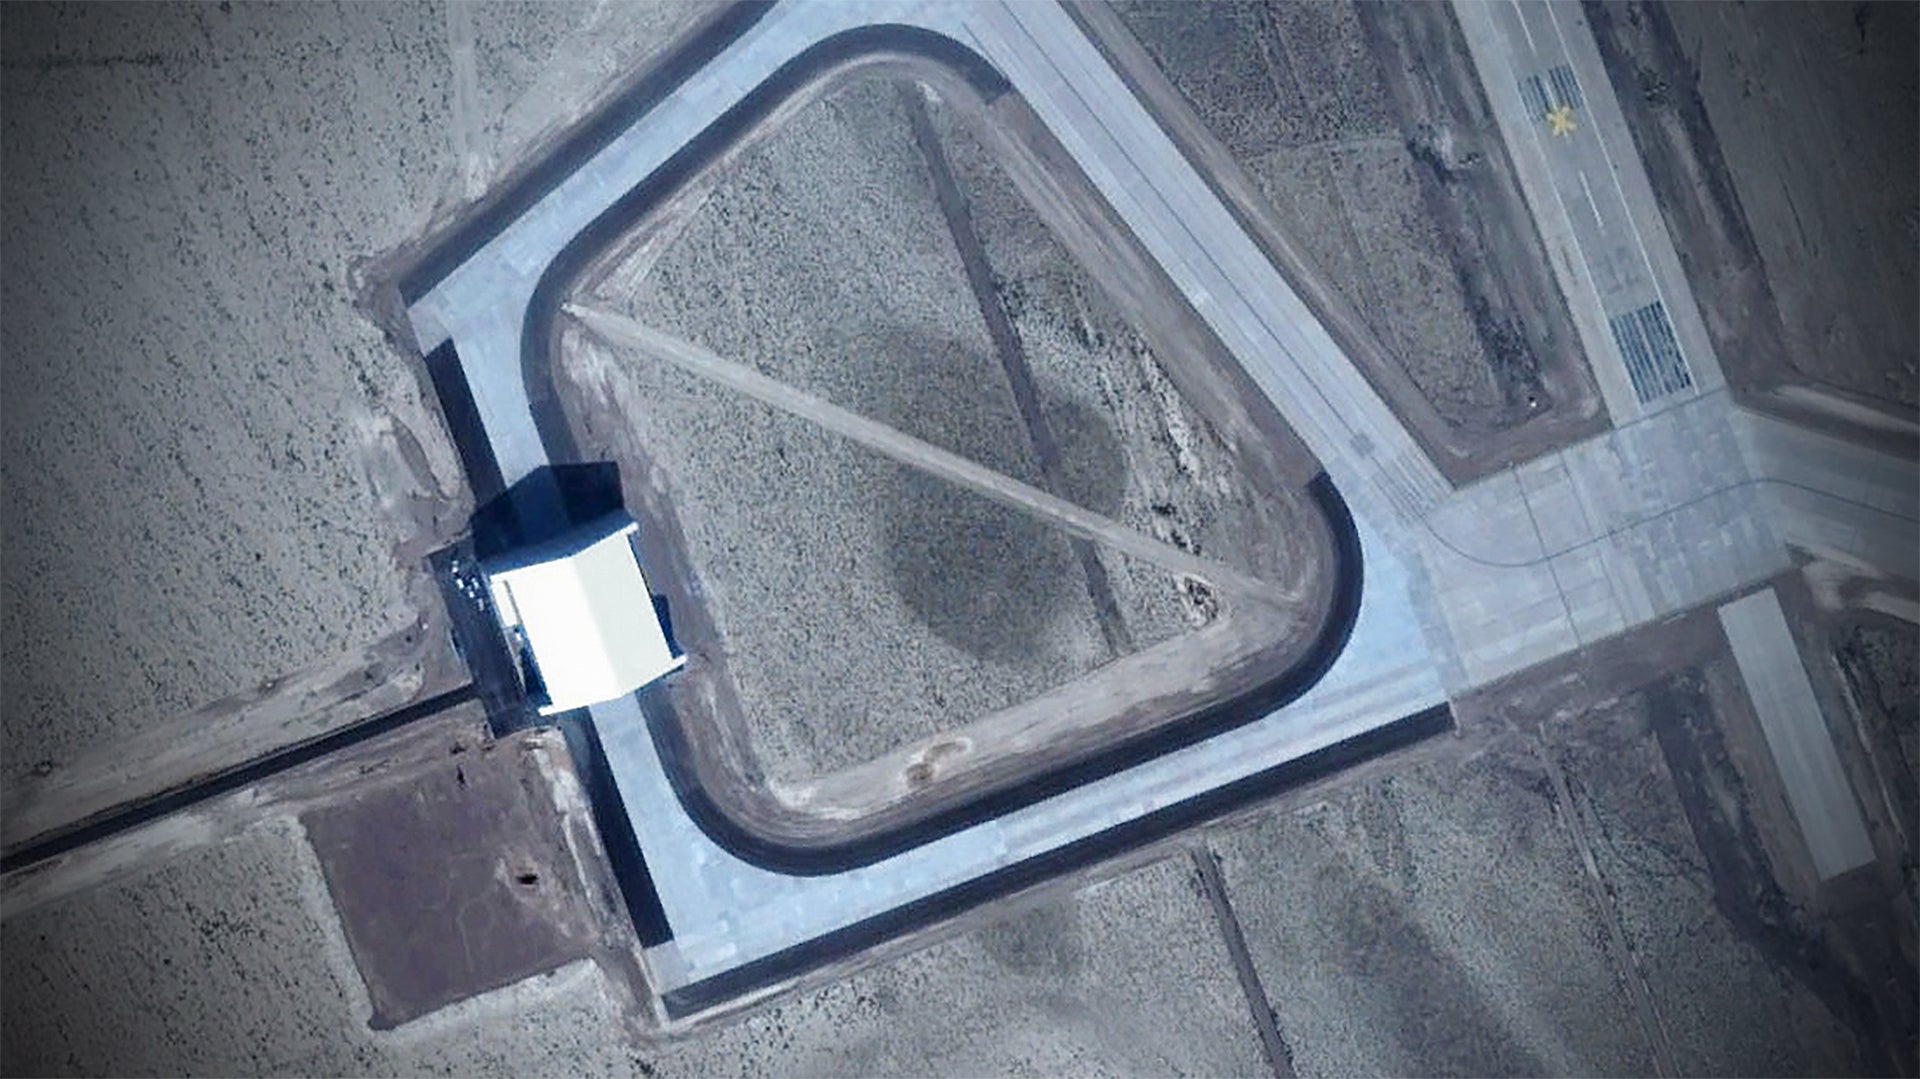 Area 51’s Massive New Hangar Shows Up in New Google Earth Images Of The Secret Base